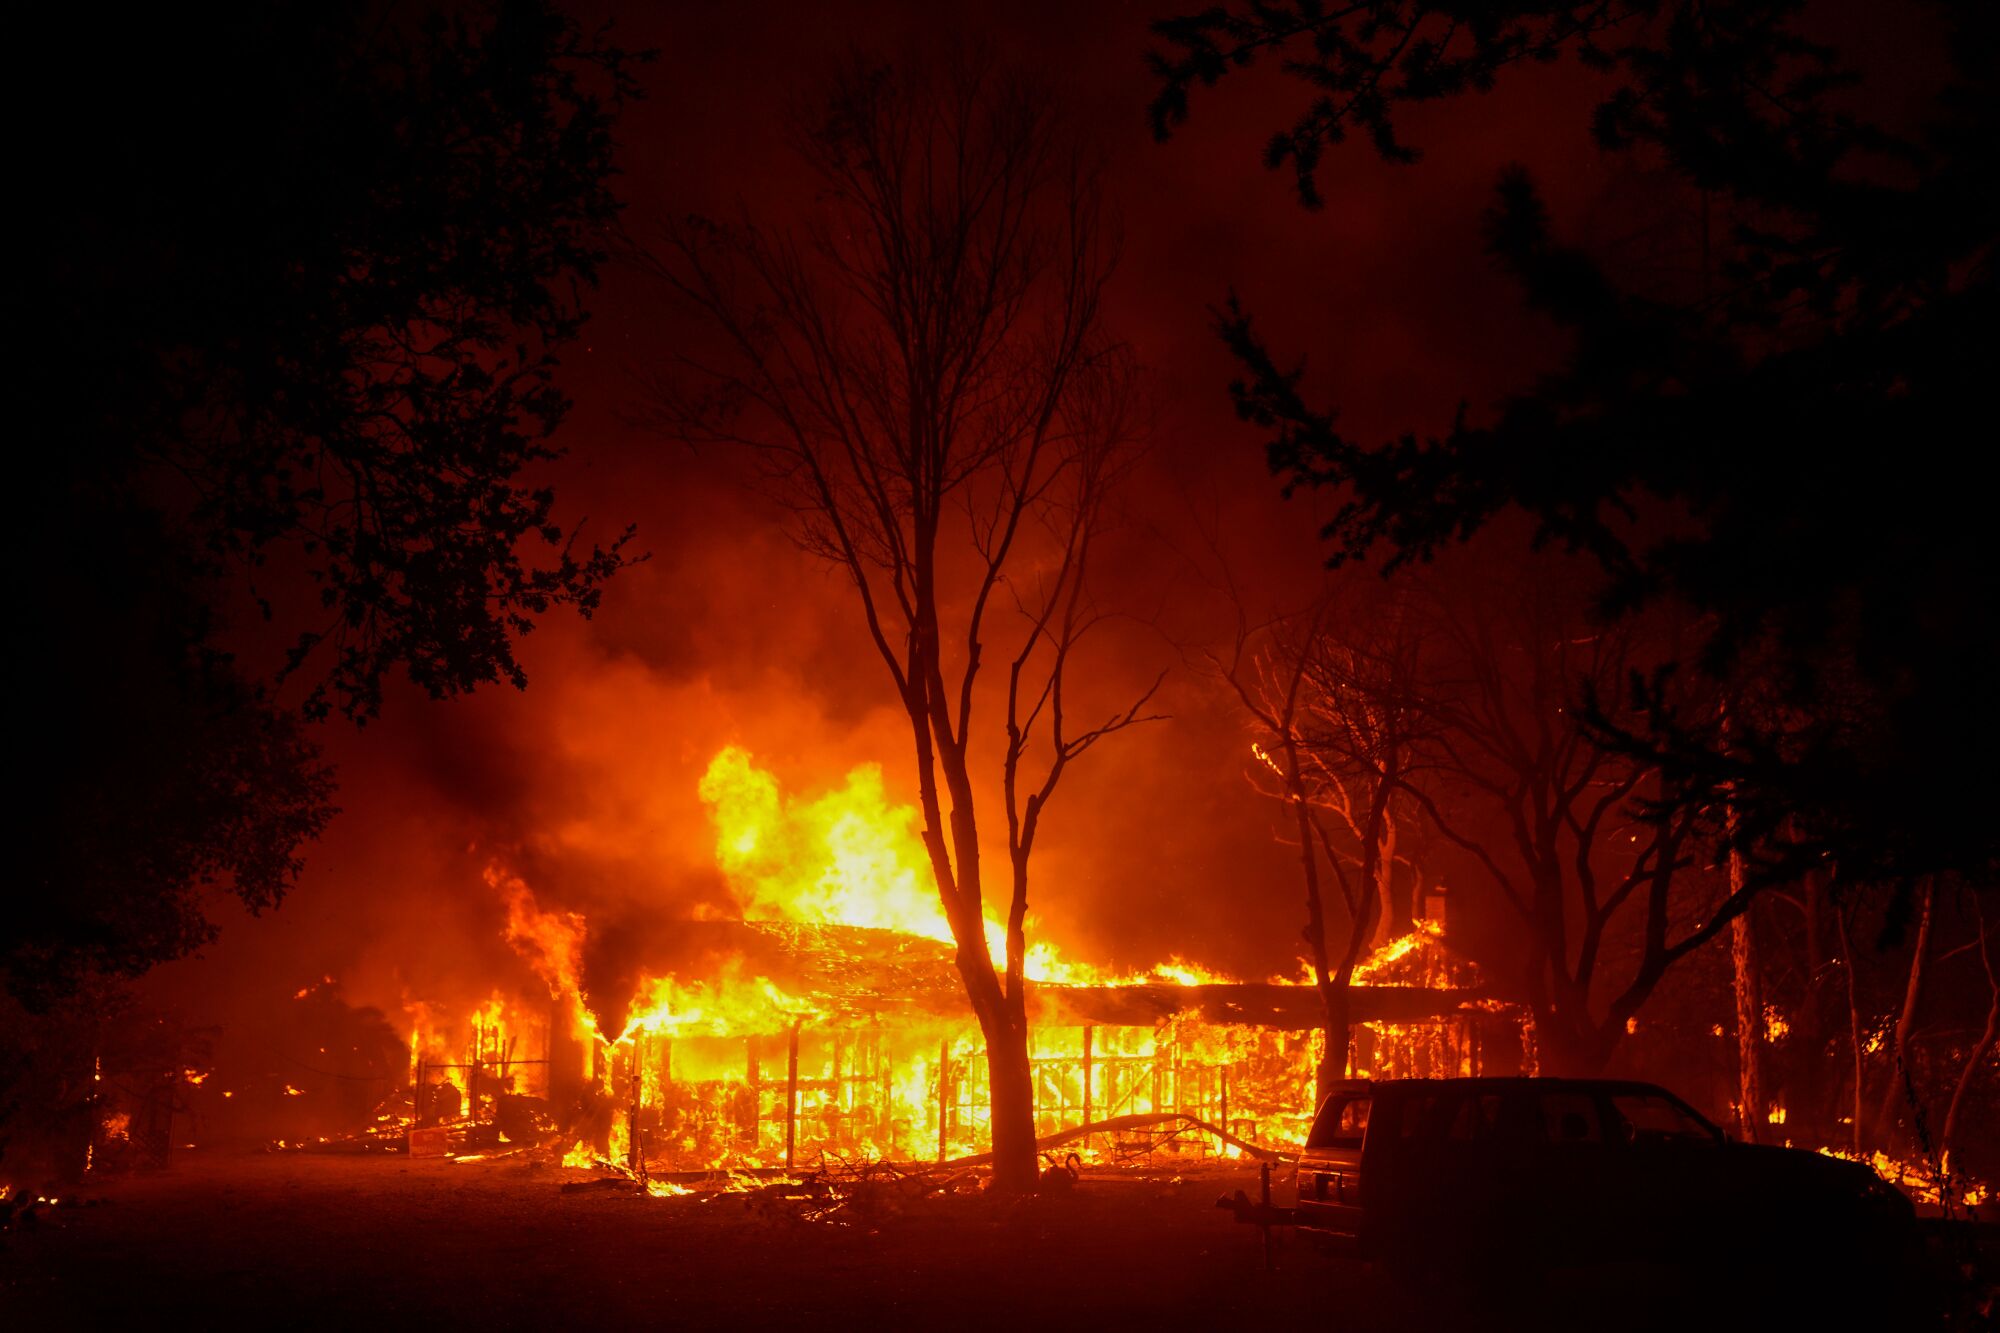 The Shady fire burns structures early Monday in Santa Rosa, Calif.